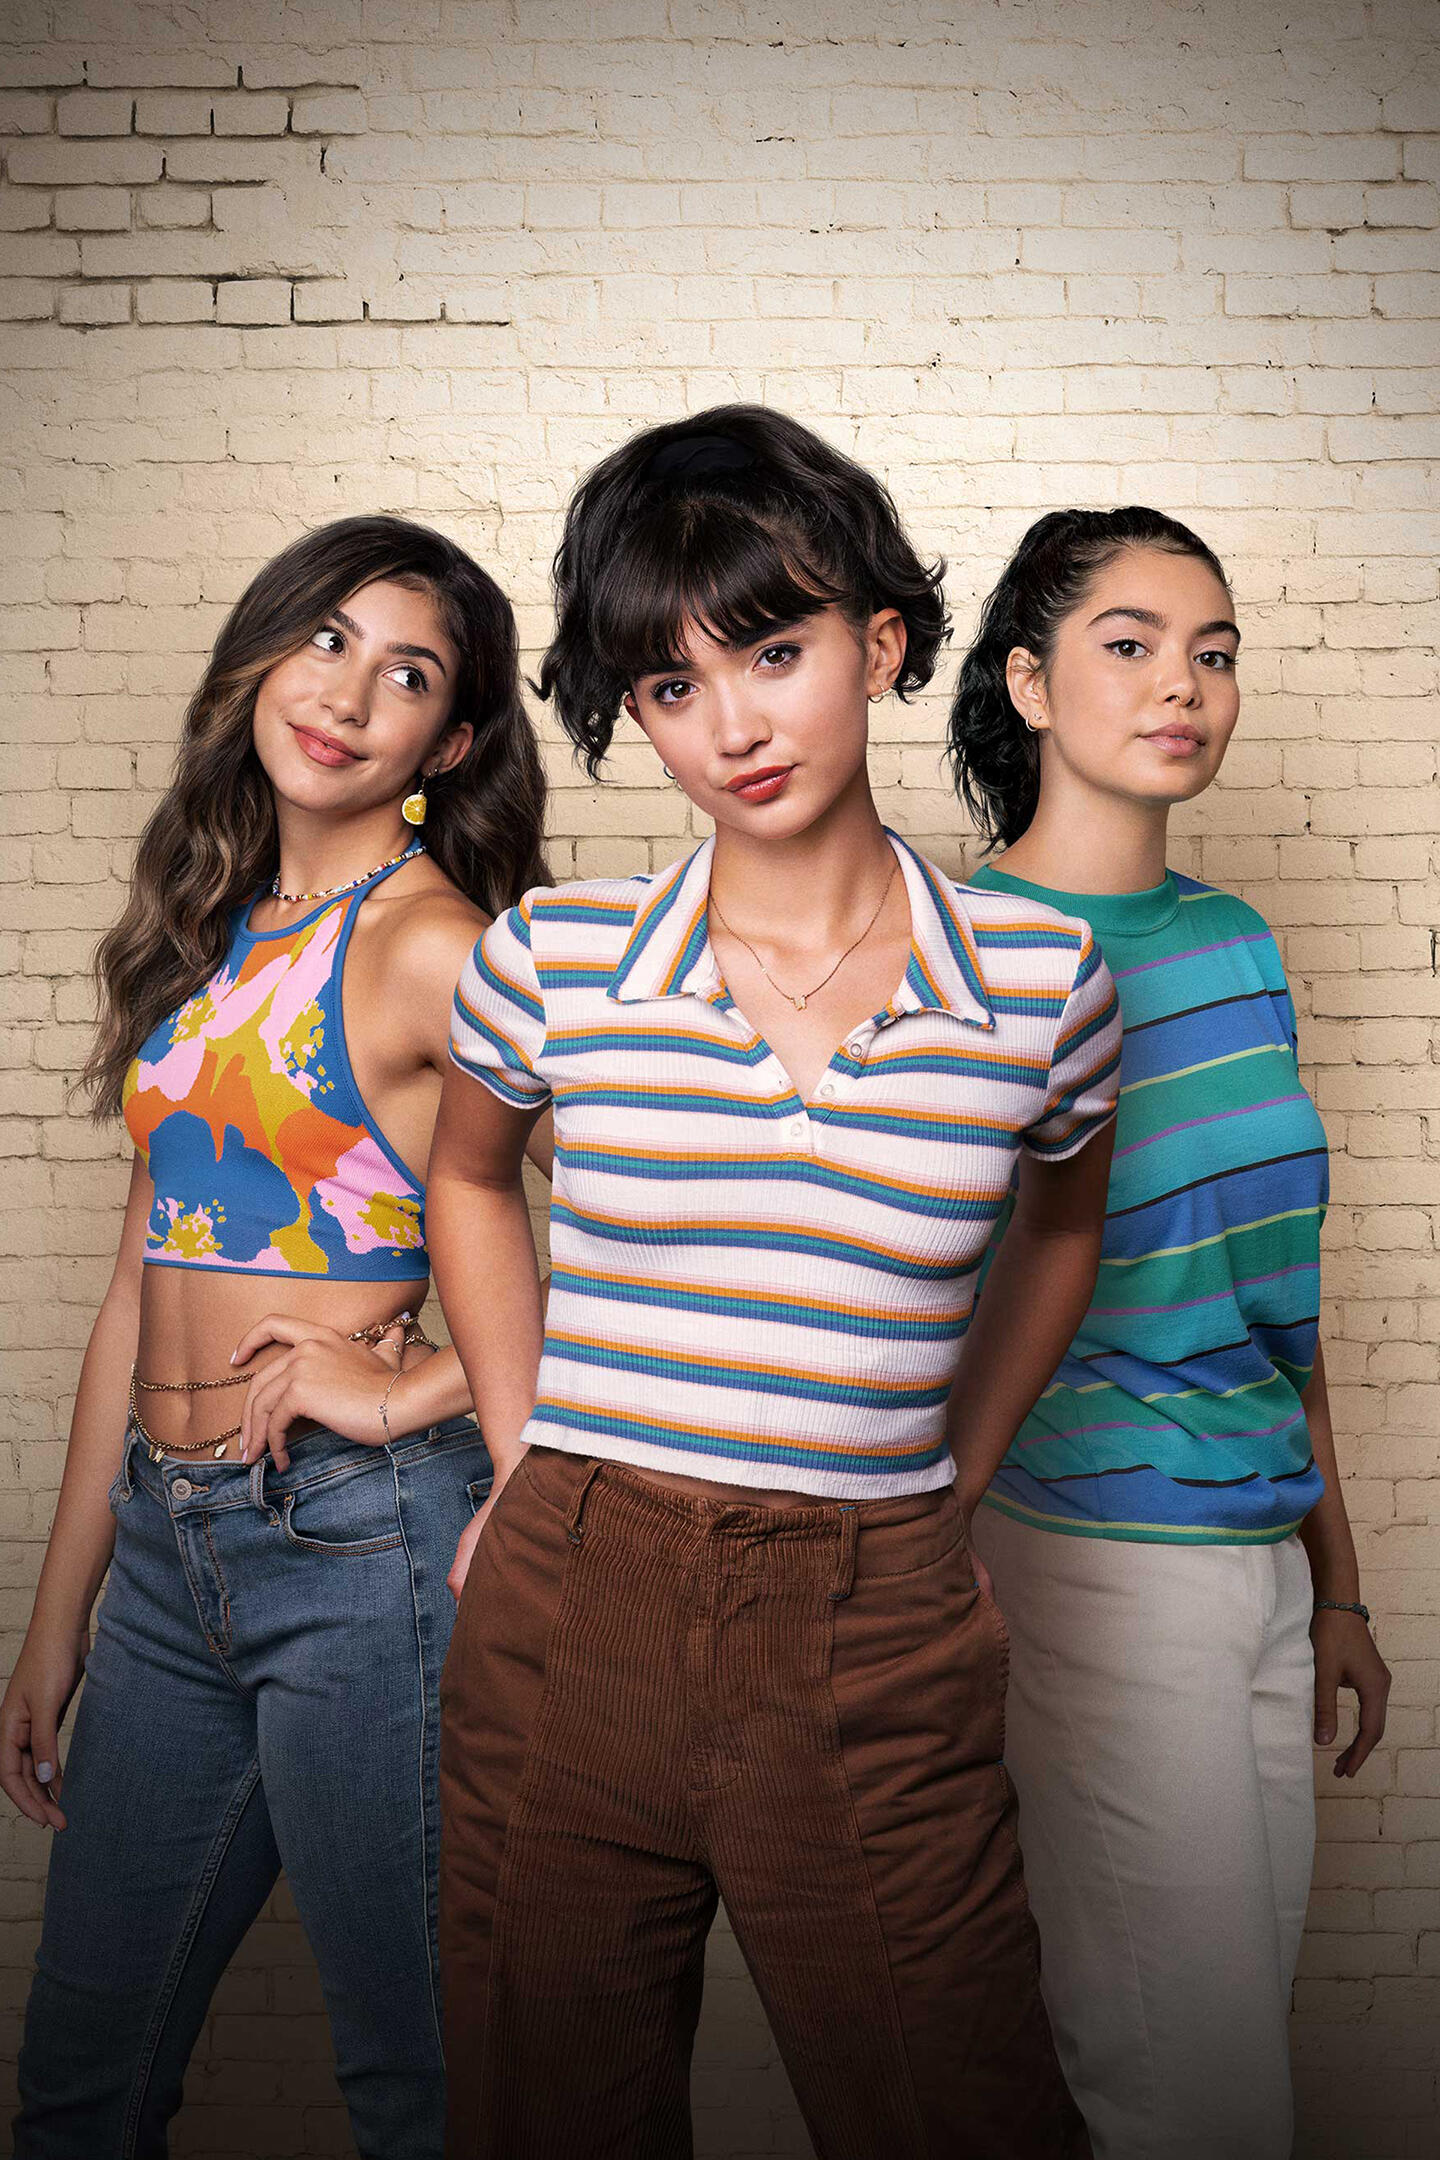 Crush -- When an aspiring young artist is forced to join her high school track team, she uses it as an opportunity to pursue the girl she’s been harboring a long-time crush on. But she soon finds herself falling for an unexpected teammate and discovers what real love feels like. Paige Evans (Rowan Blanchard), AJ Campos (Auli'i Cravalho) and Gabrielle Campos (Isabella Ferreira), shown. (Courtesy of Hulu)